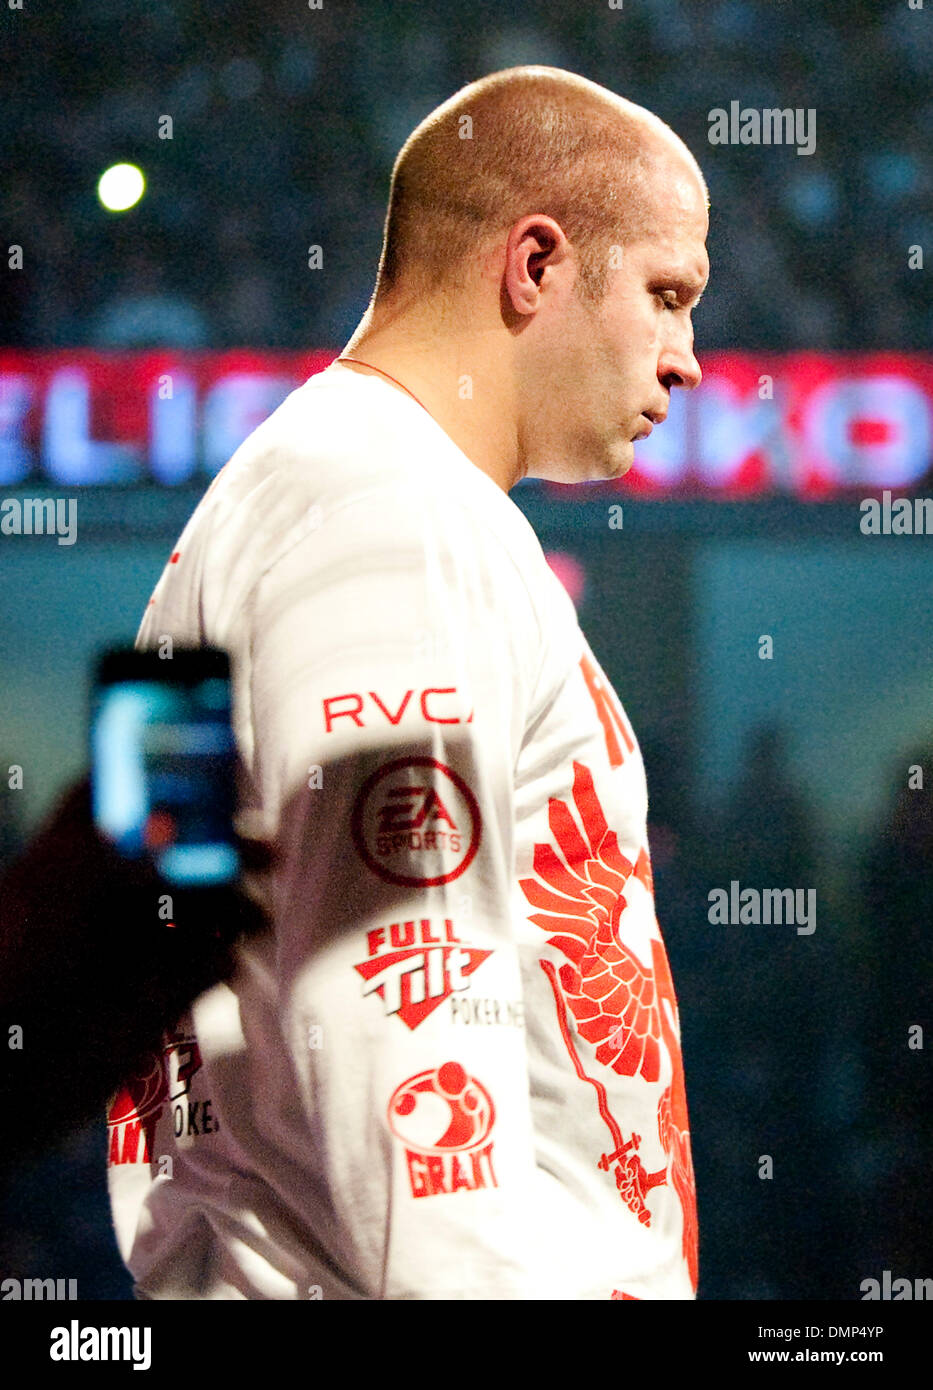 Nov. 12, 2009 - Hoffman Estates, Illinois, U.S - 07 November 2009:  A very concentrated Fedor Emelianenko makes his way down the entrance ramp before his fight at the Sears Centre in Hoffman Estates, IL., agianst Brett Rogers. (Credit Image: © Louis Brems/Southcreek Global/ZUMApress.com) Stock Photo